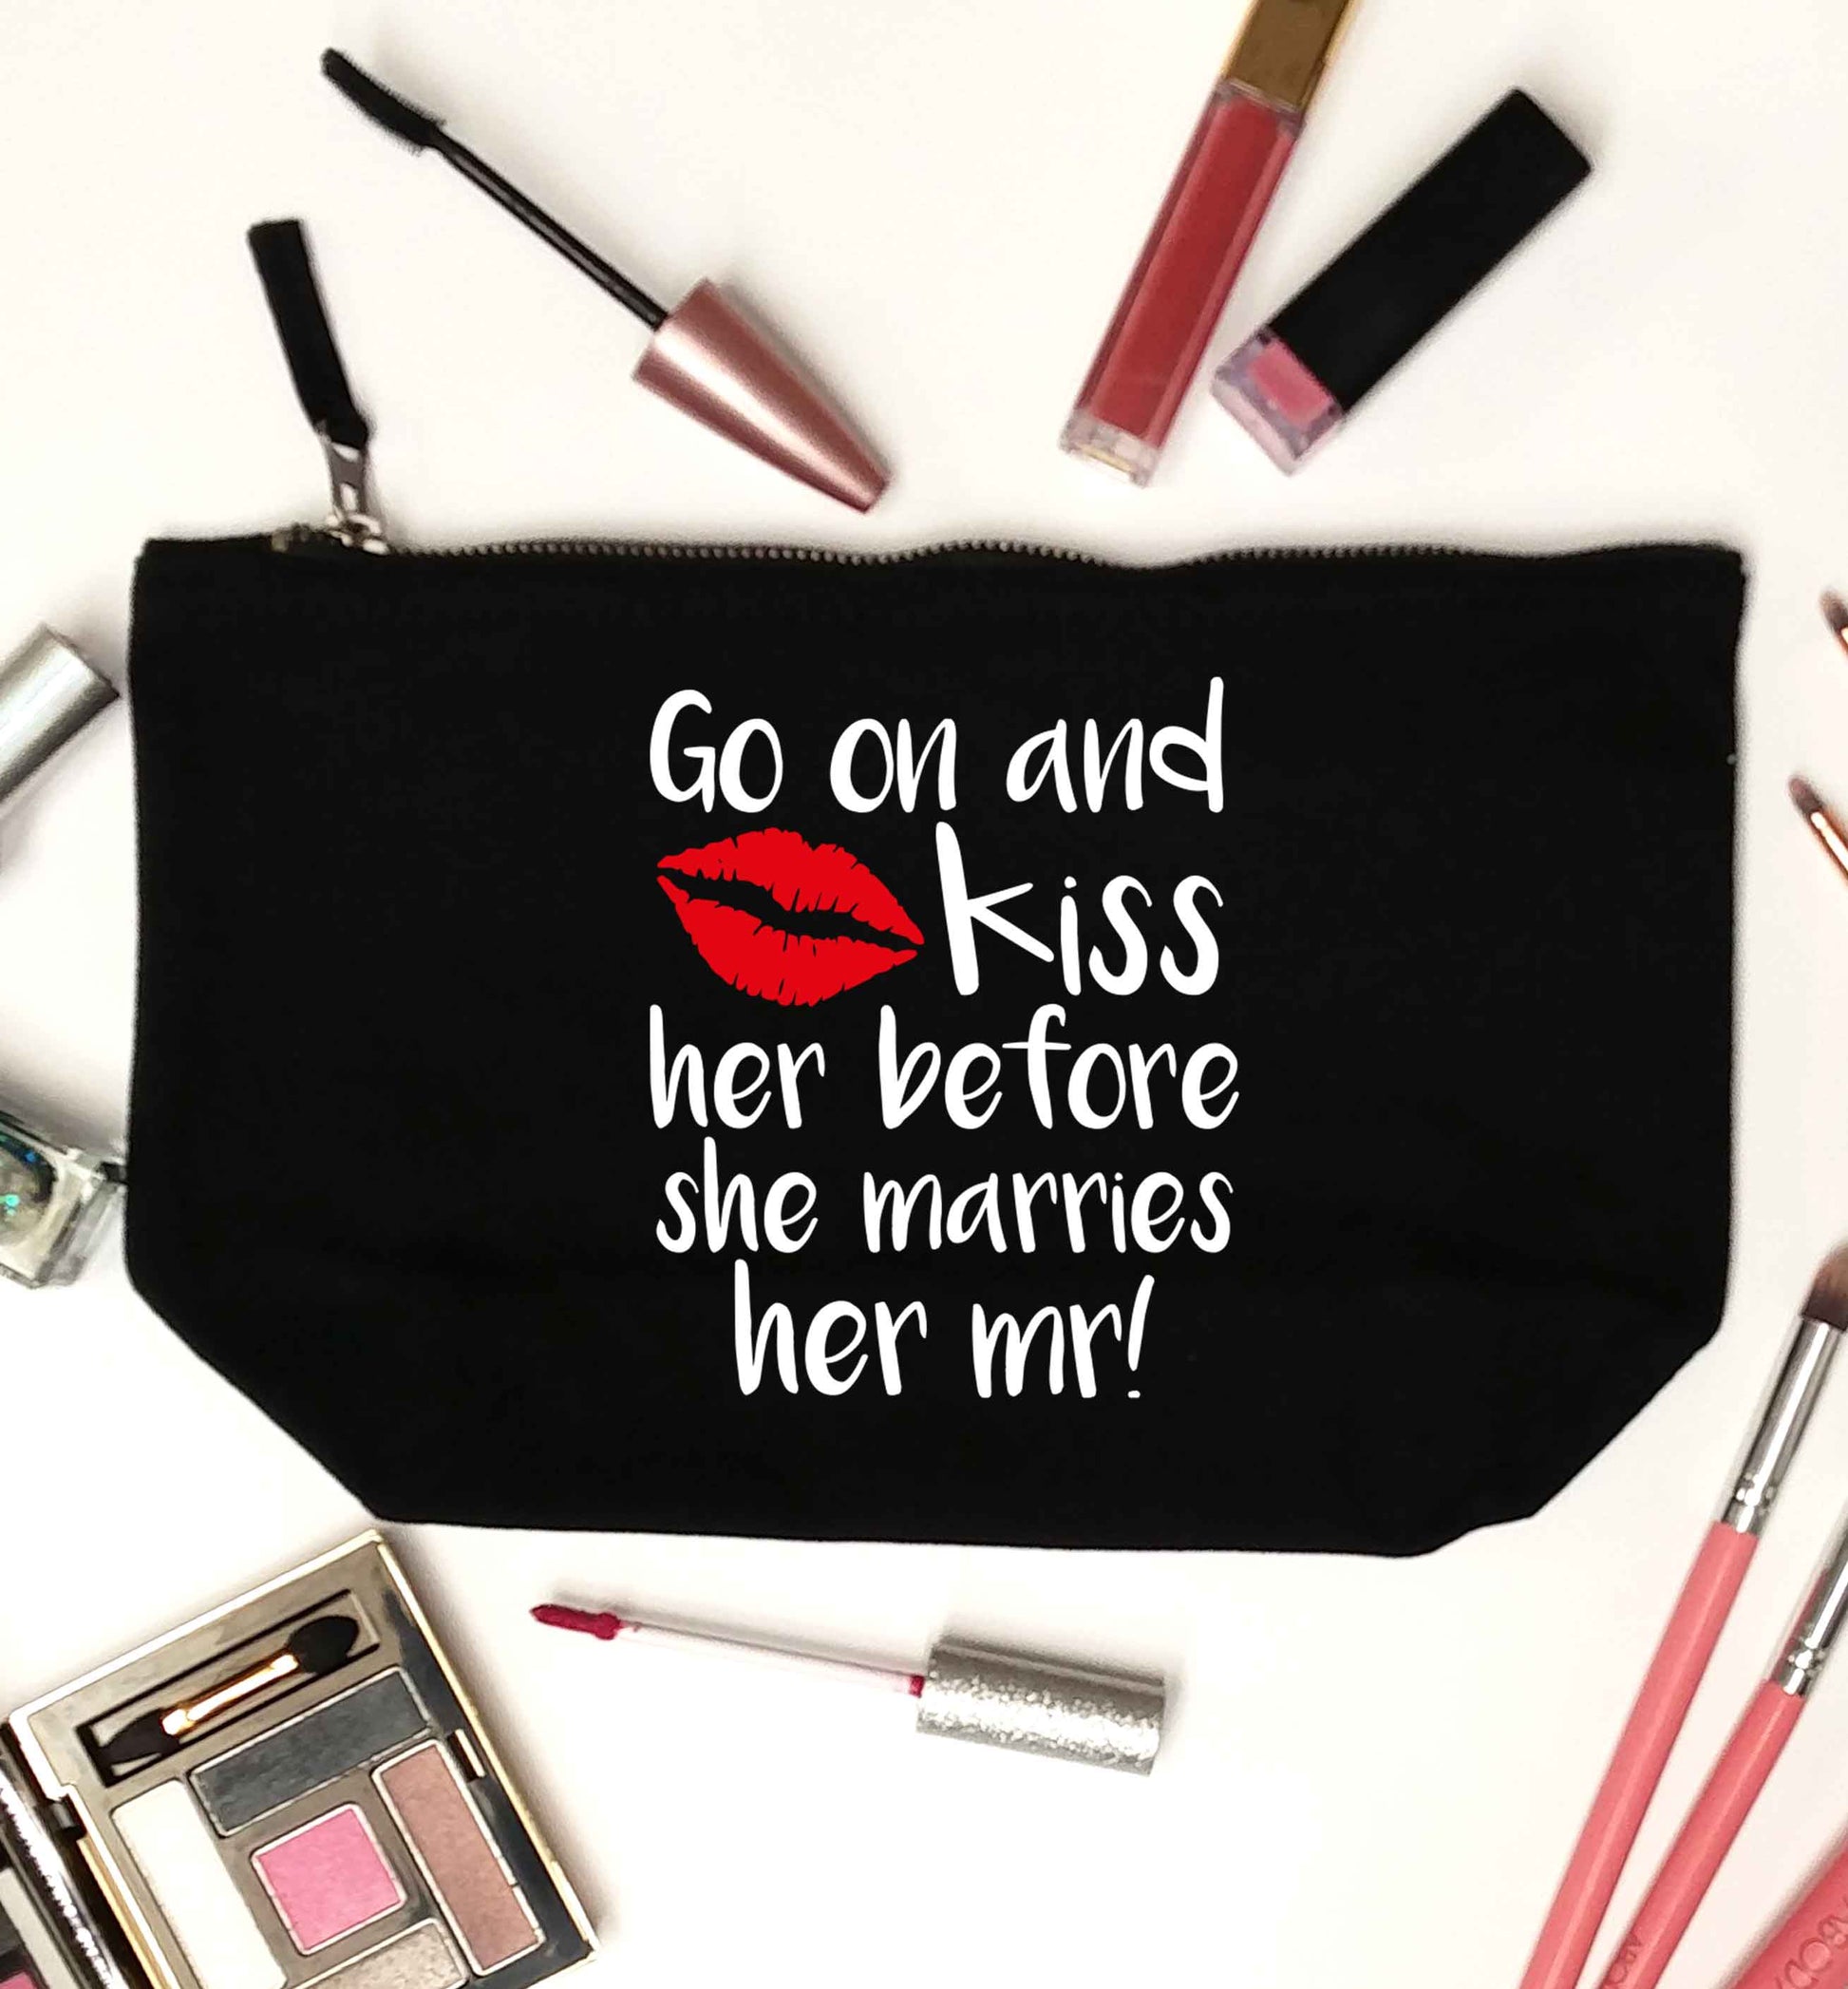 Kiss her before she marries her mr! black makeup bag